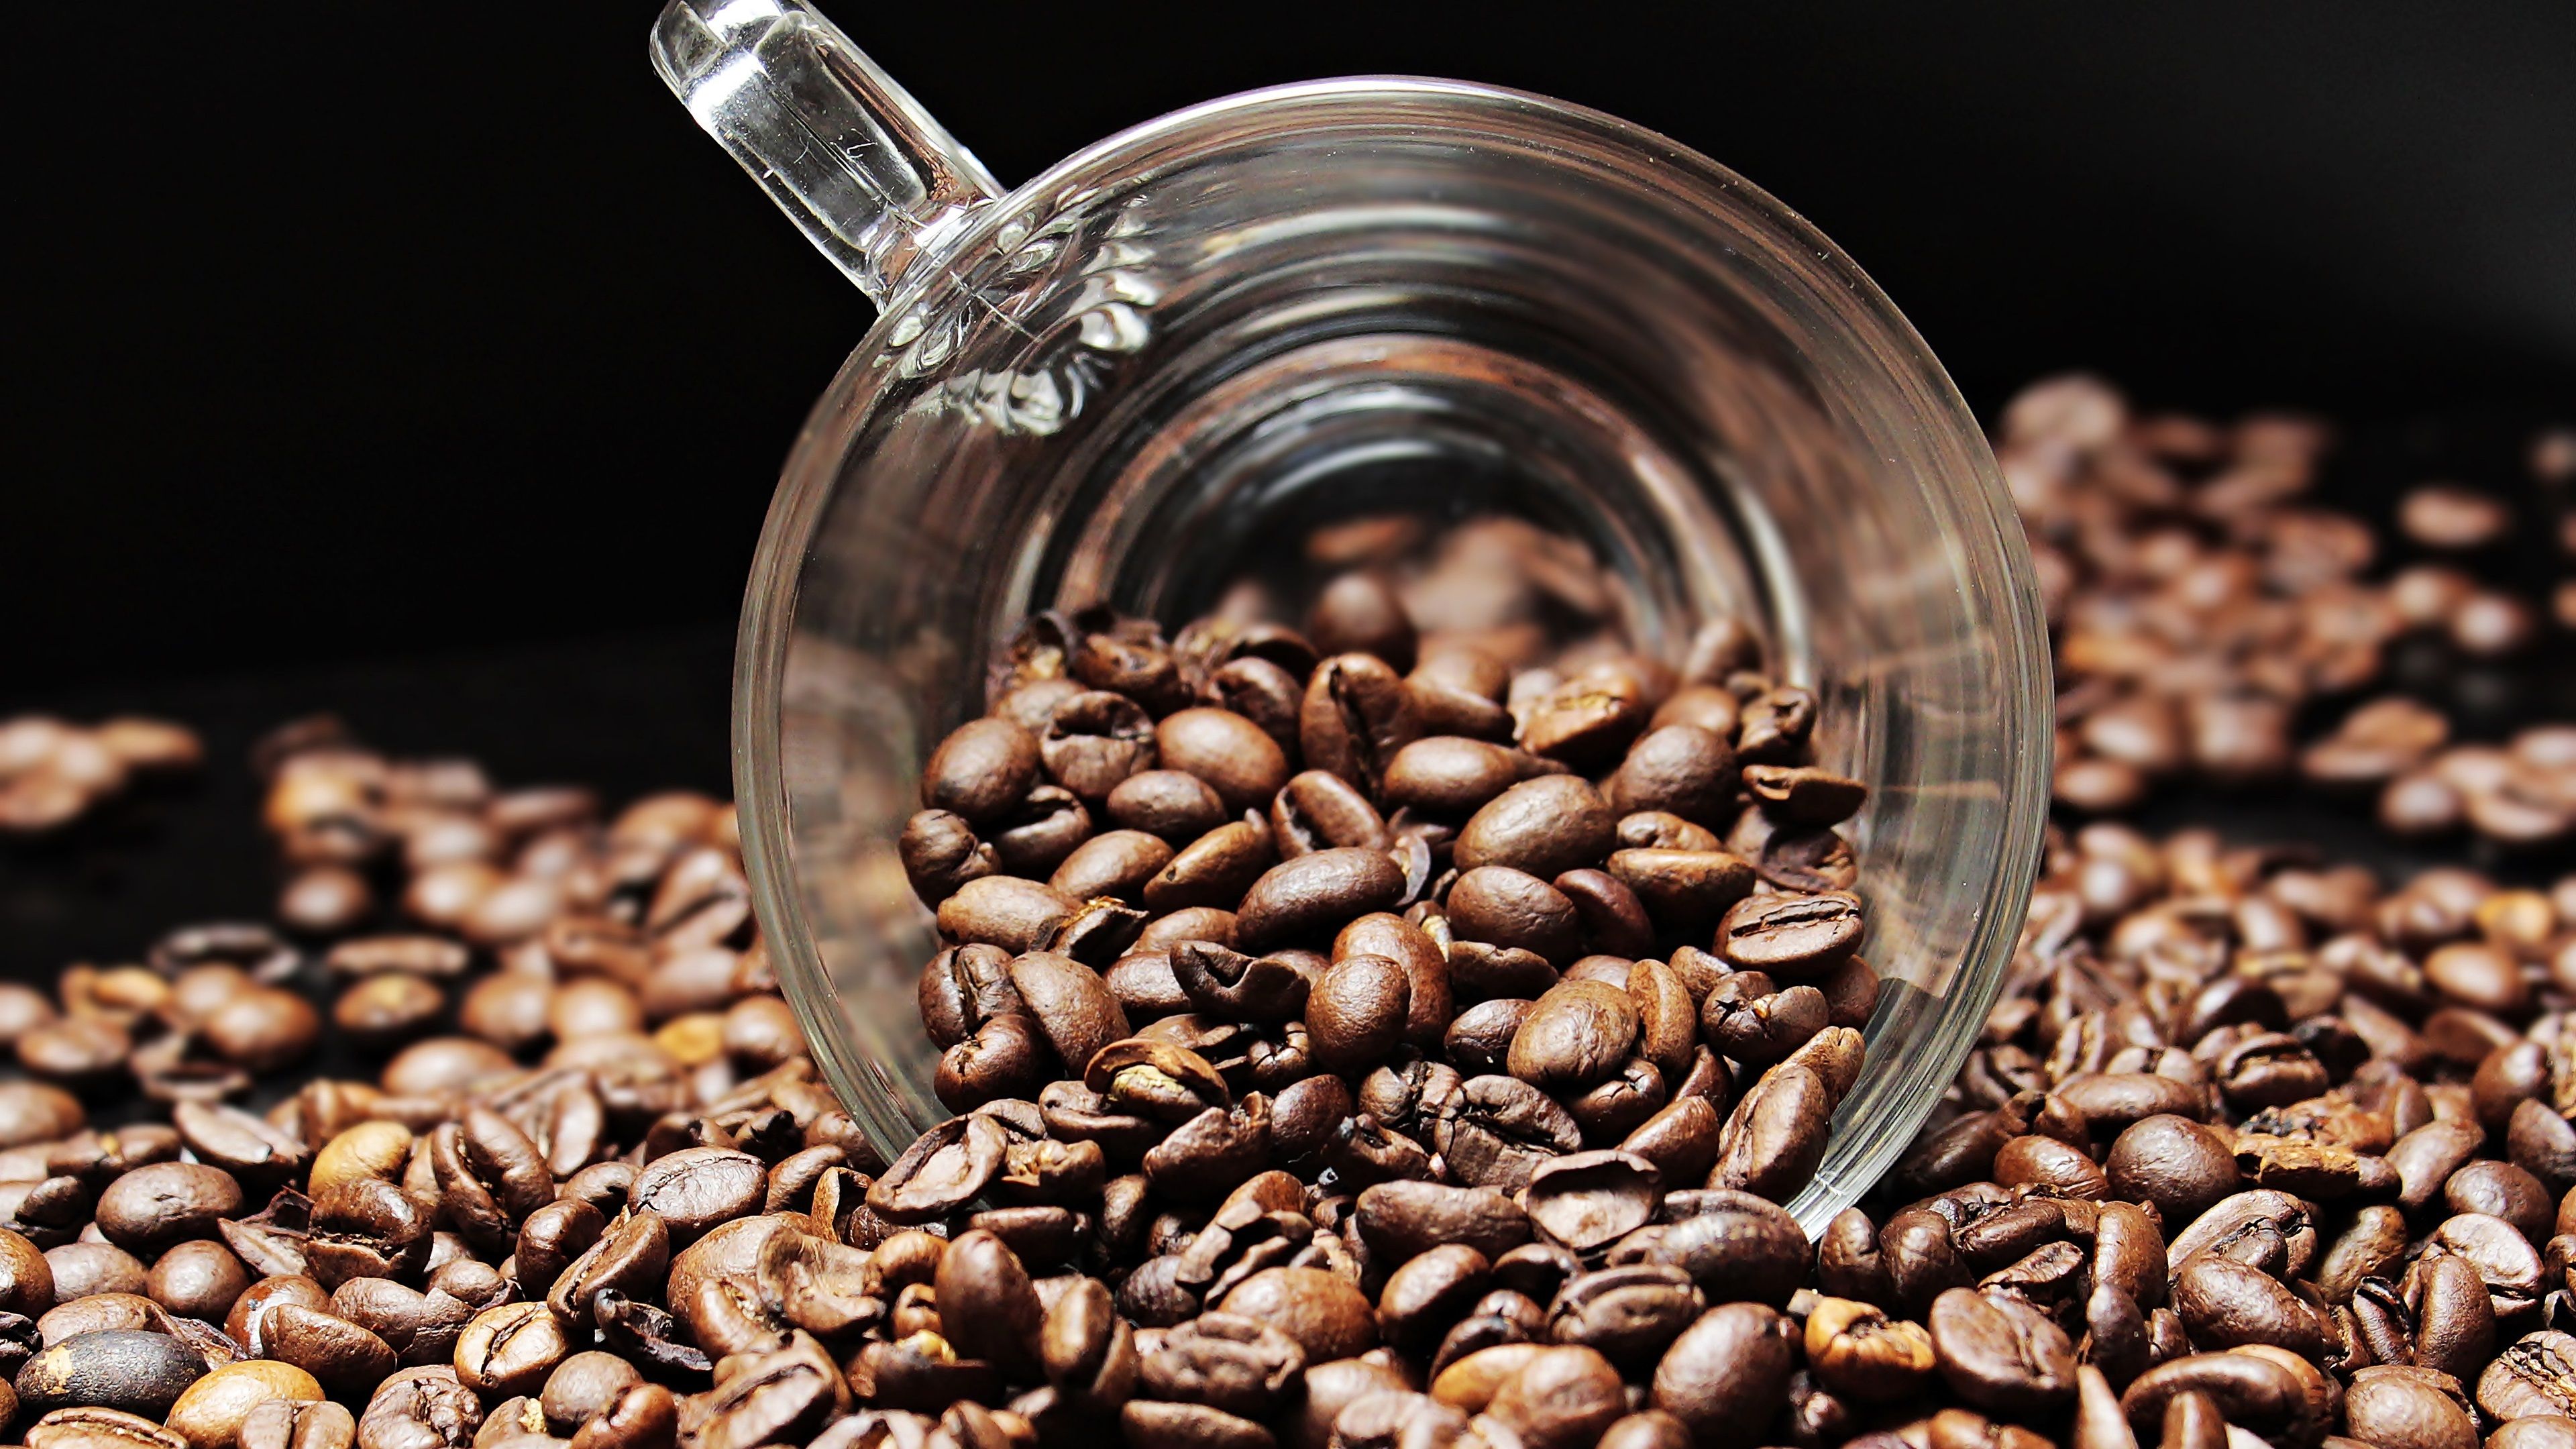 Wallpaper Coffee beans, glass cup 3840x2160 UHD 4K Picture, Image